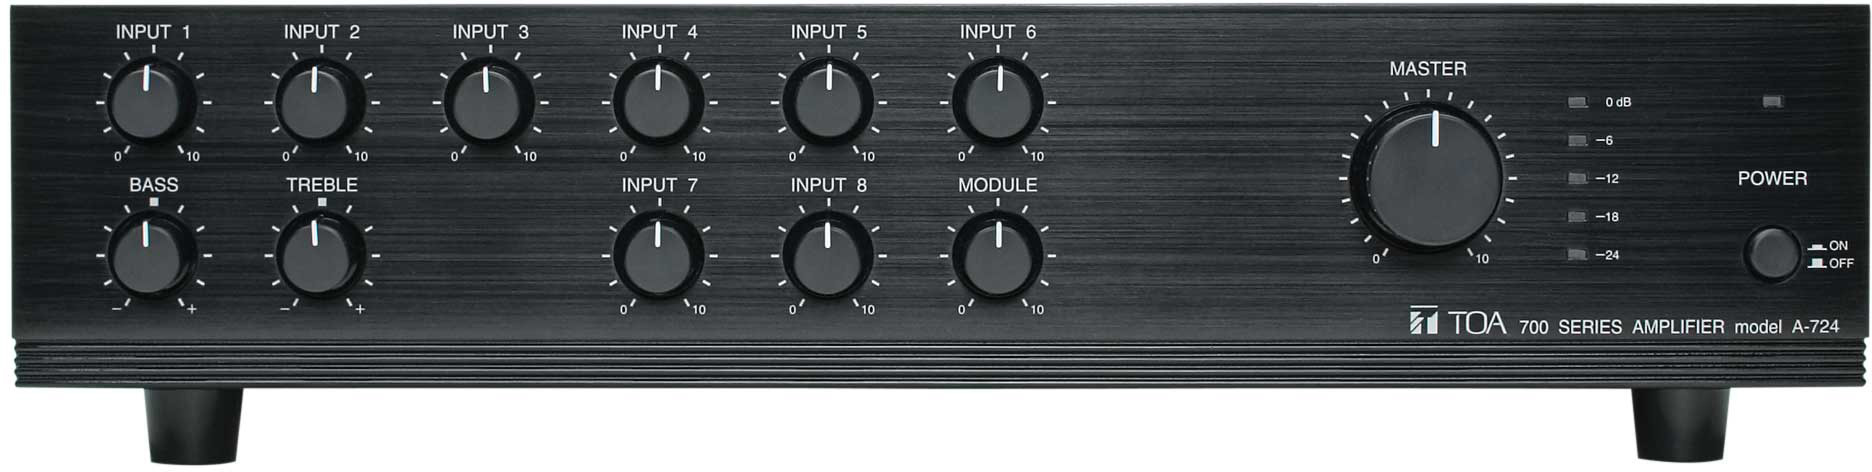 6 Input Mixer Amplifier with Automatic System Test